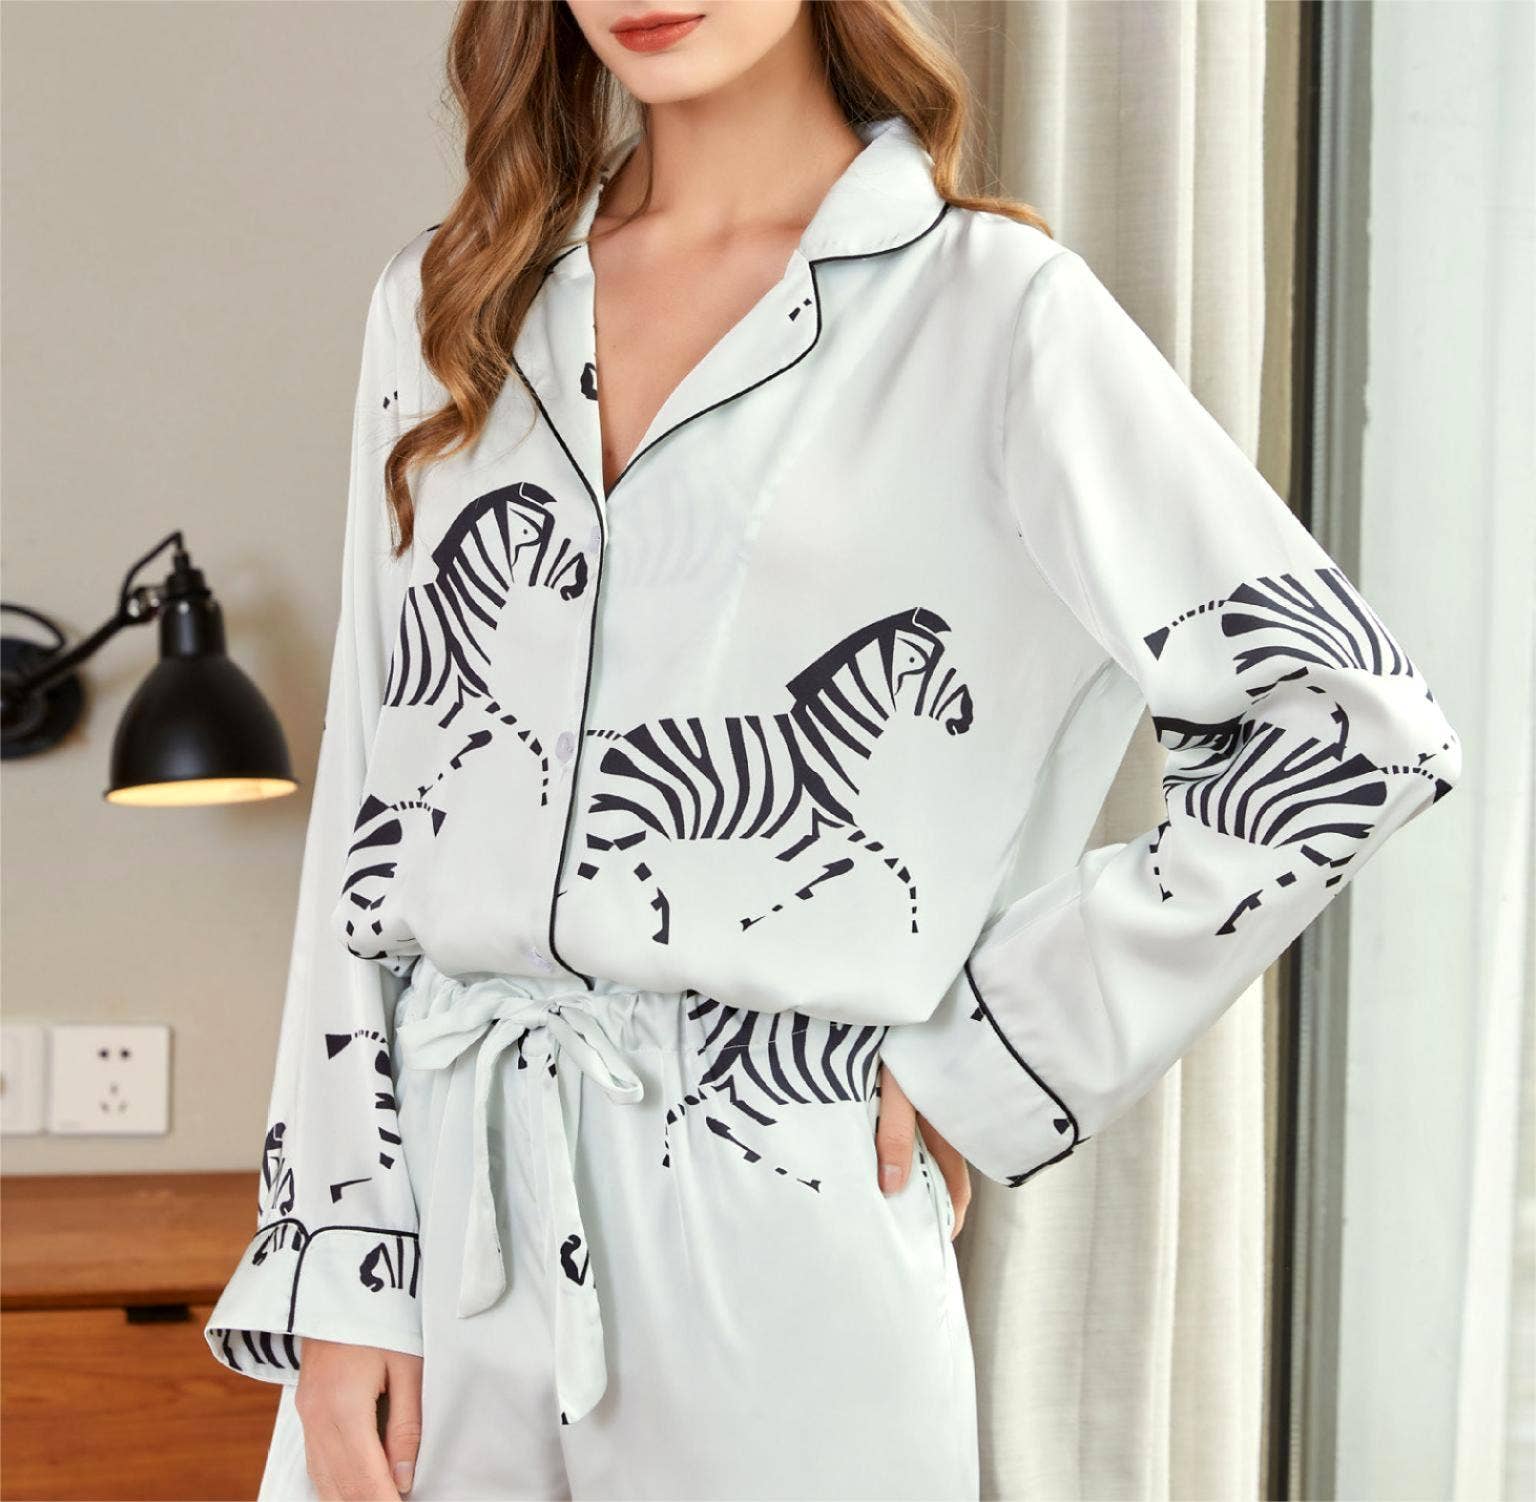 GLOBAL Women's 100% Cotton Pajama Set|Long-Sleeved with Pants PJs |Button  Down Front Top&Drawstring Waist Bottom Nightwear